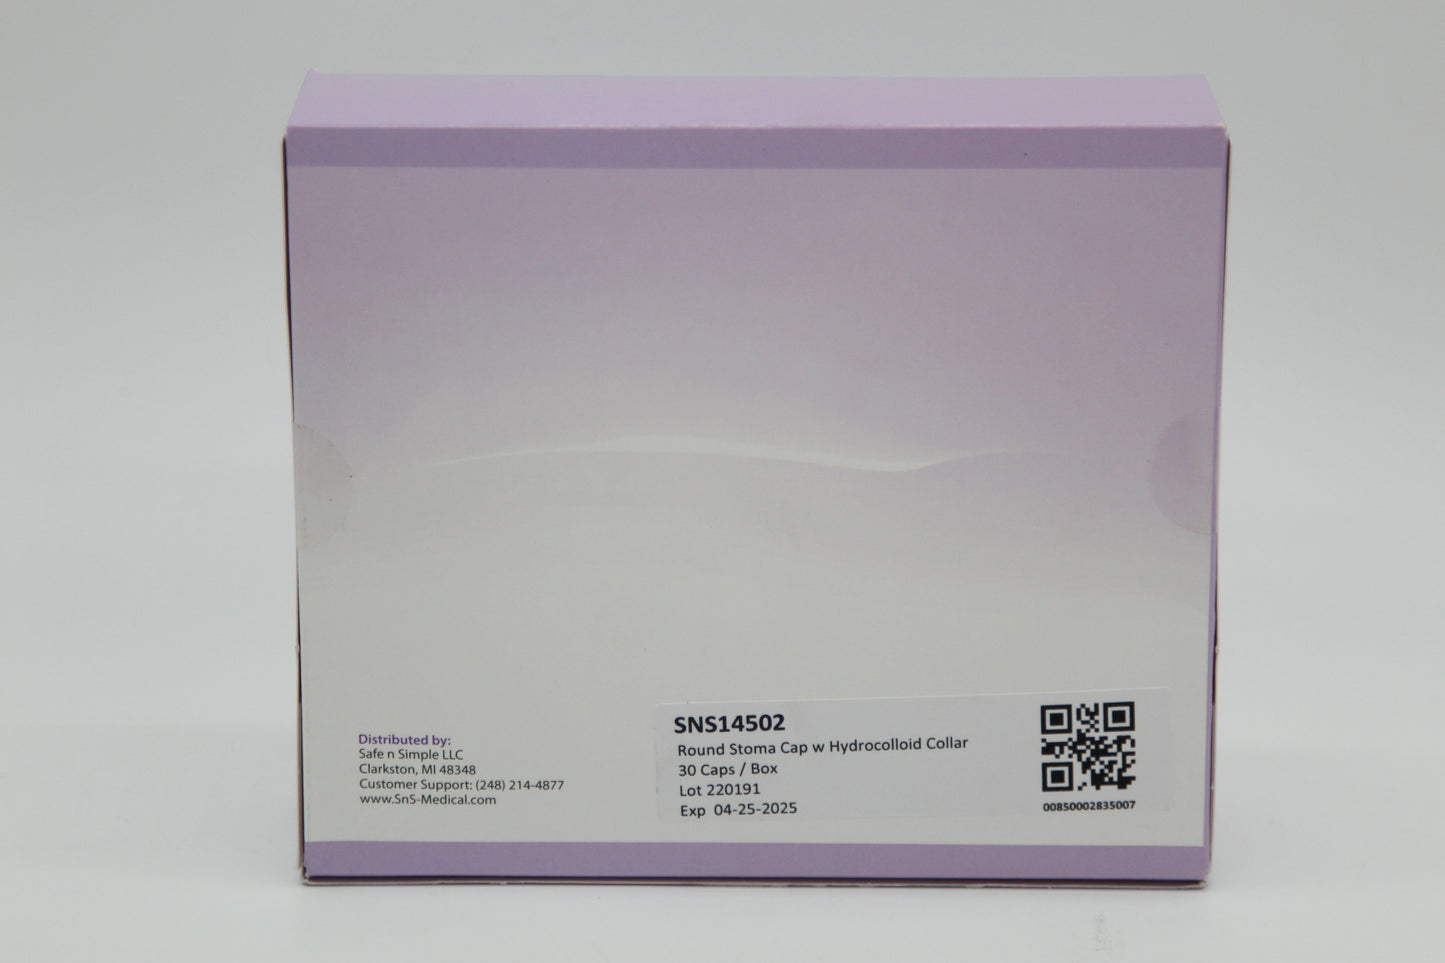 Stoma Cap - Hydrocolloid Collar | Skin barrier | Great barrier relief | SNS medical | Medical products  